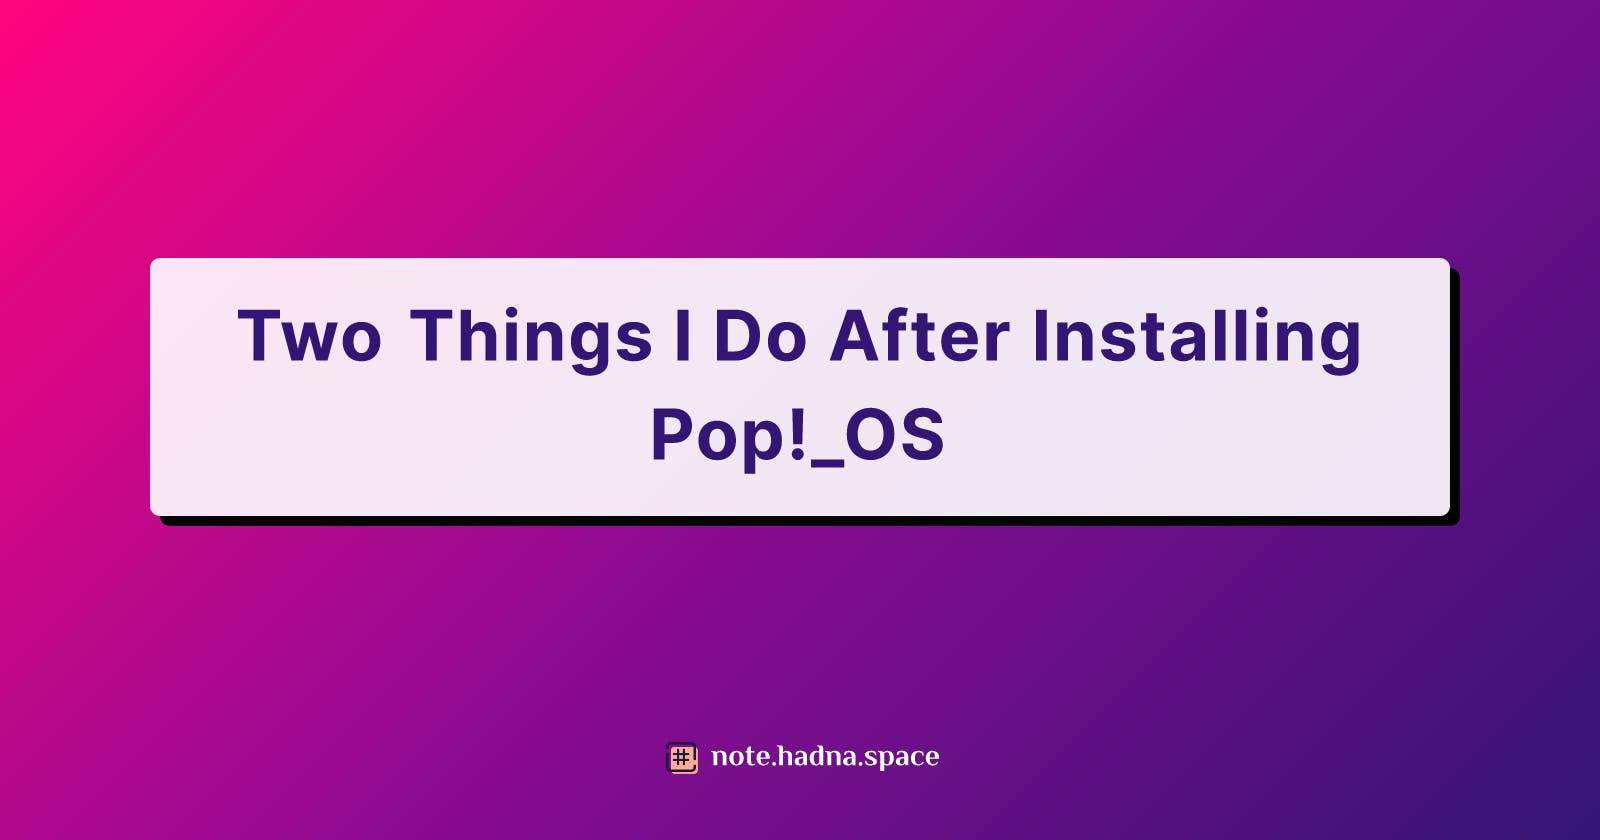 Two Things I Do After Installing Pop!_OS